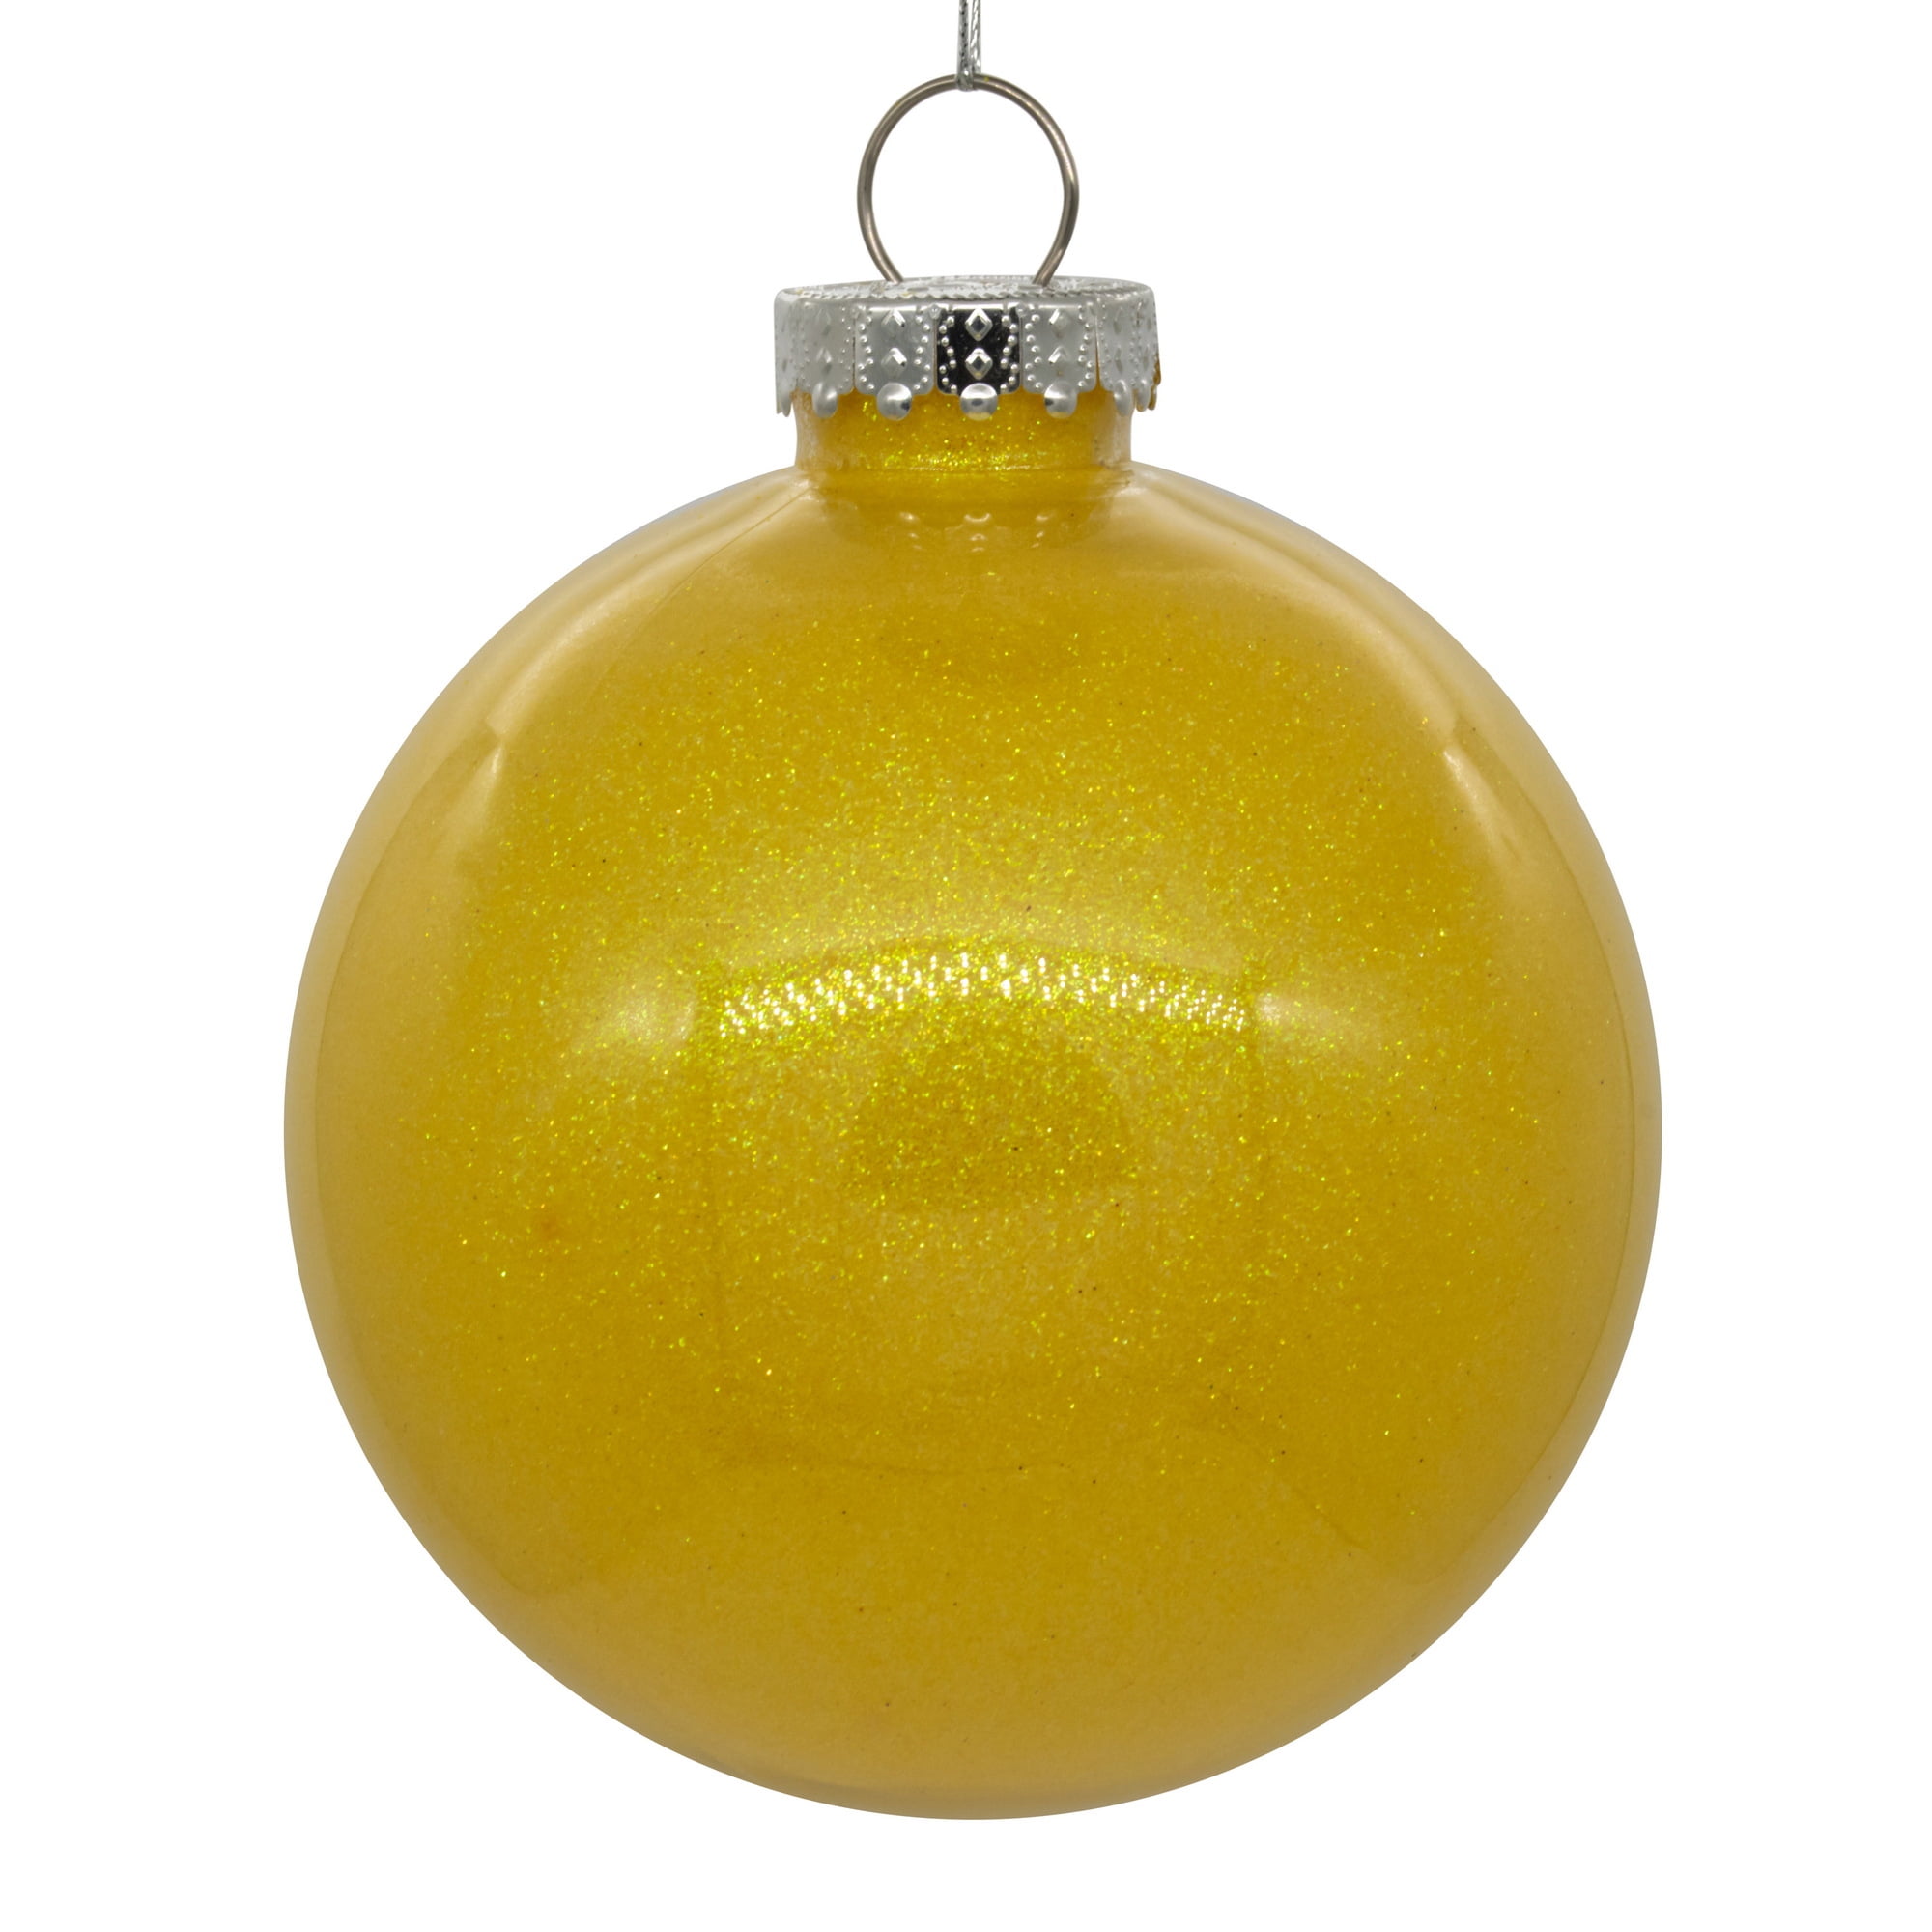 Vickerman 4 Clear Ball Christmas Ornament with Cobalt Blue Glitter Interior This Item Comes with 6 Ornaments per Unit.